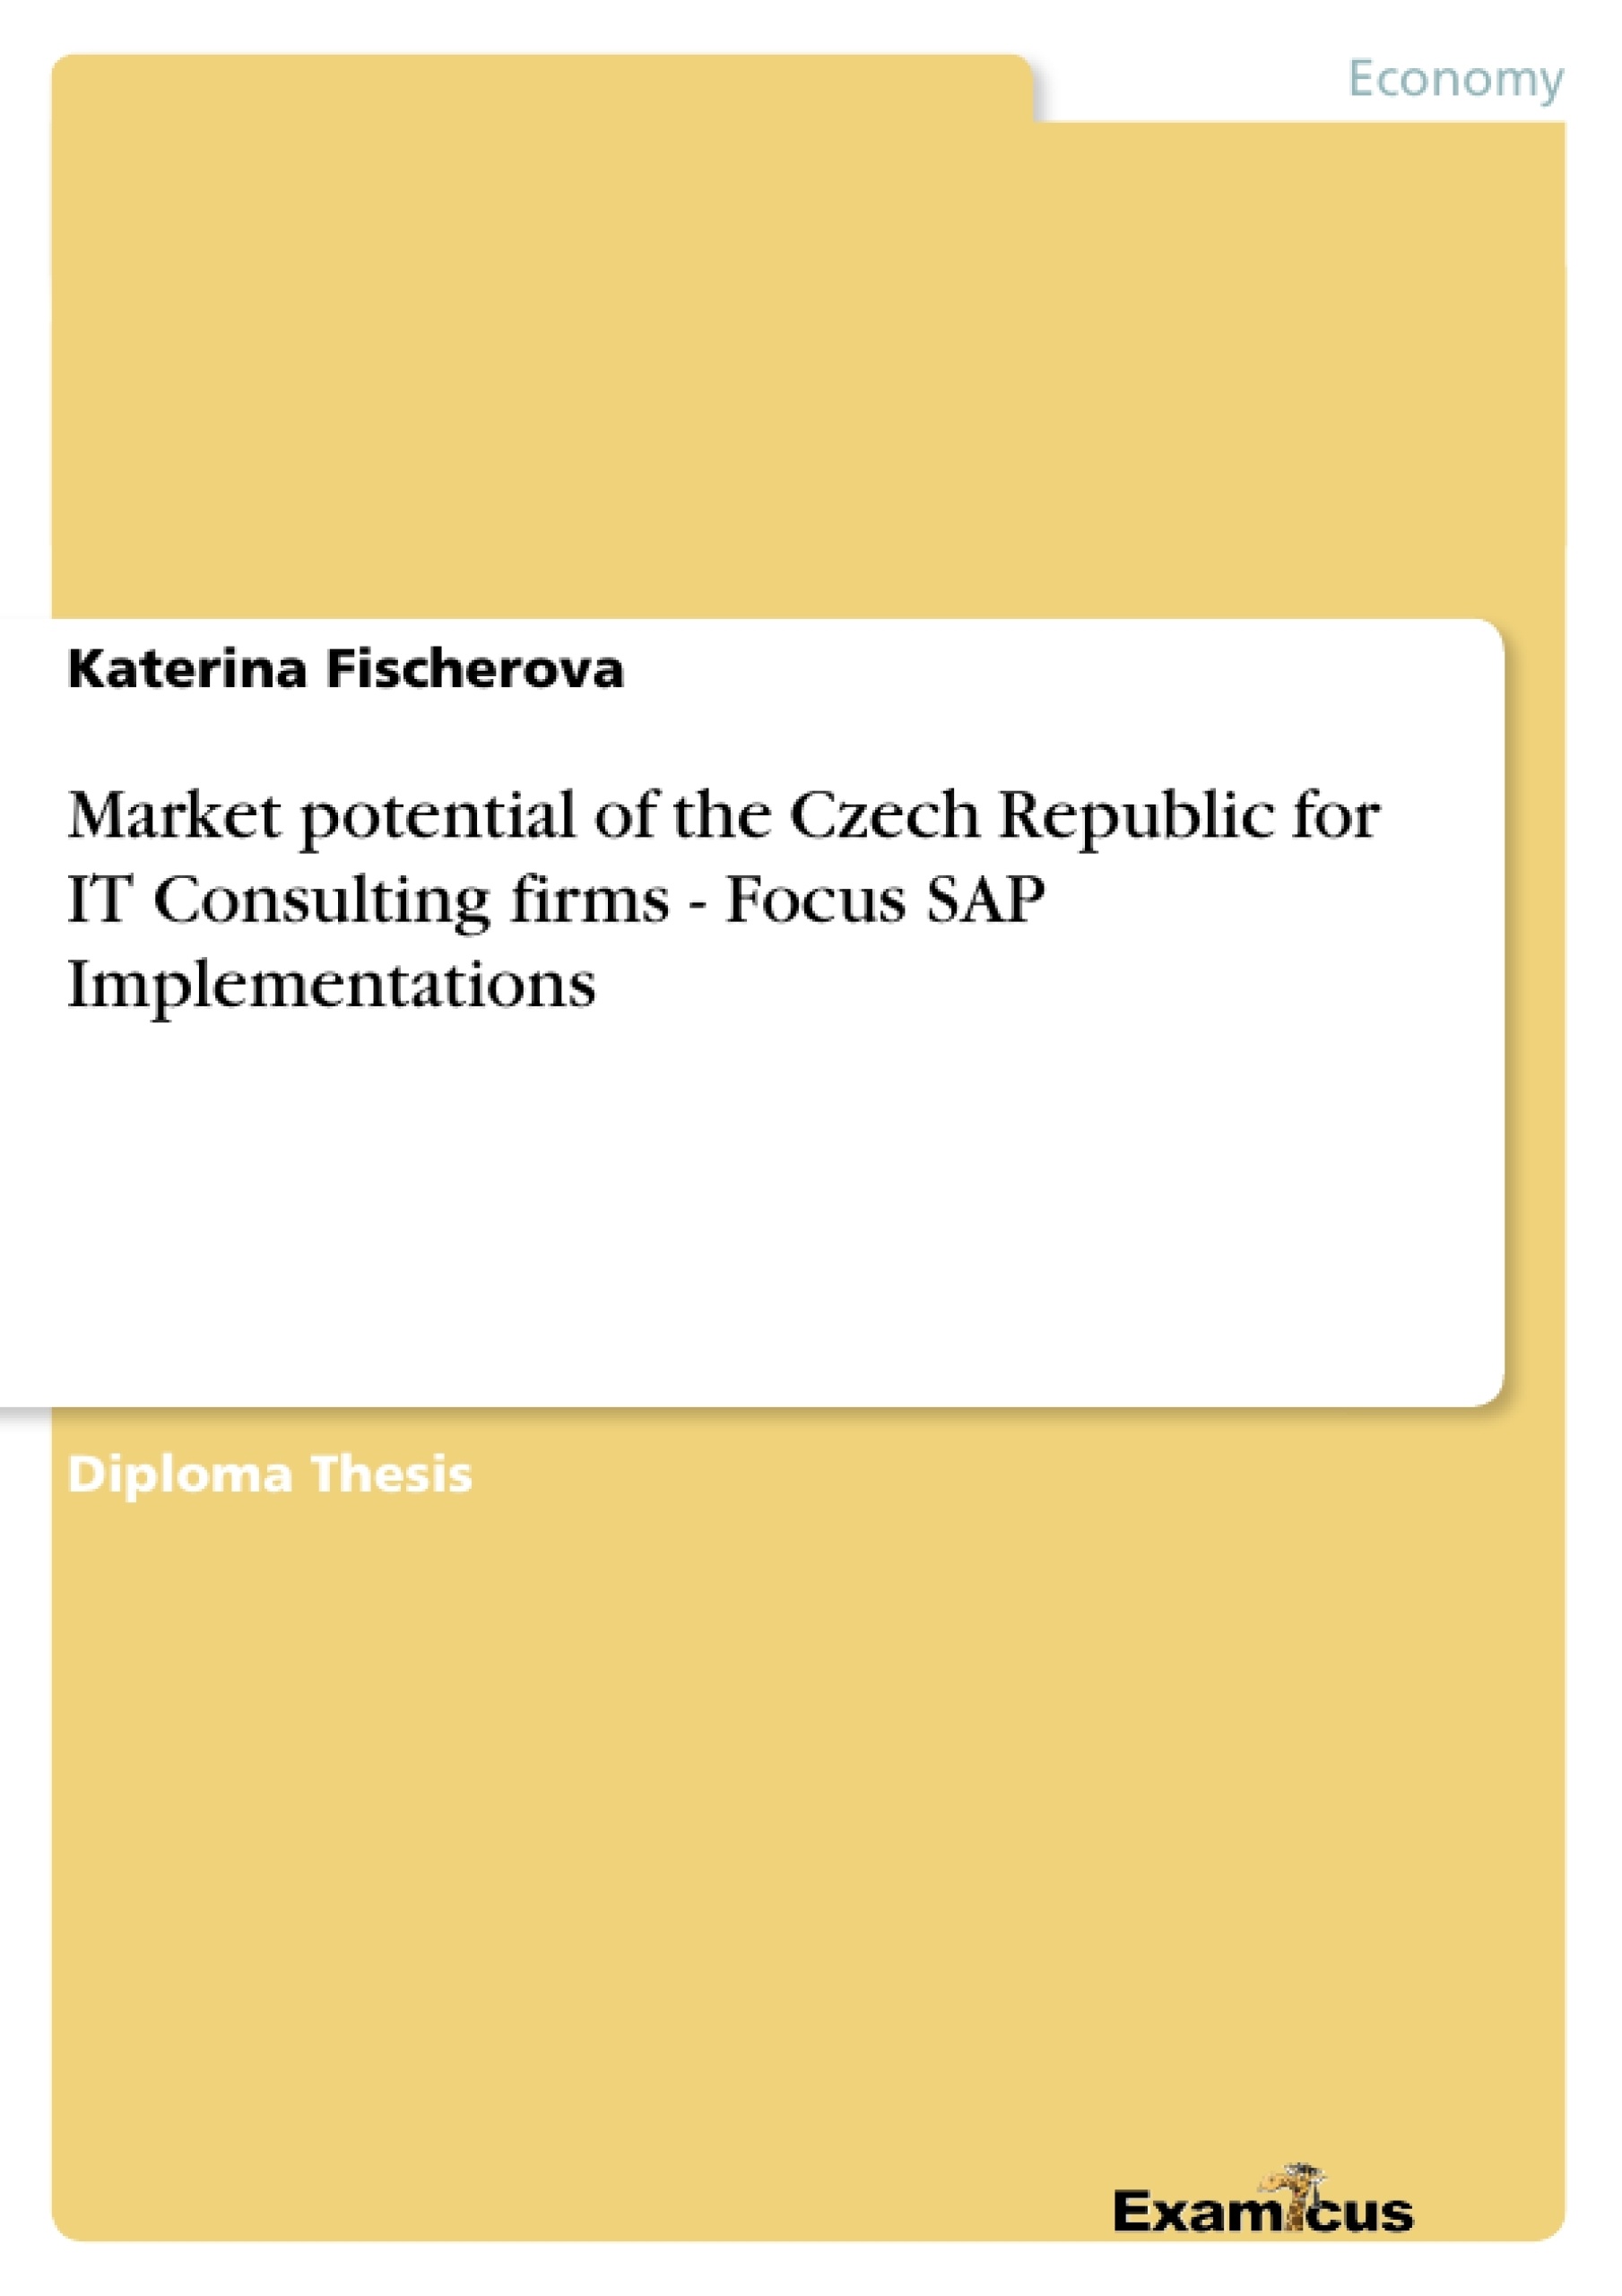 Title: Market potential of the Czech Republic for IT Consulting firms 	- Focus SAP Implementations